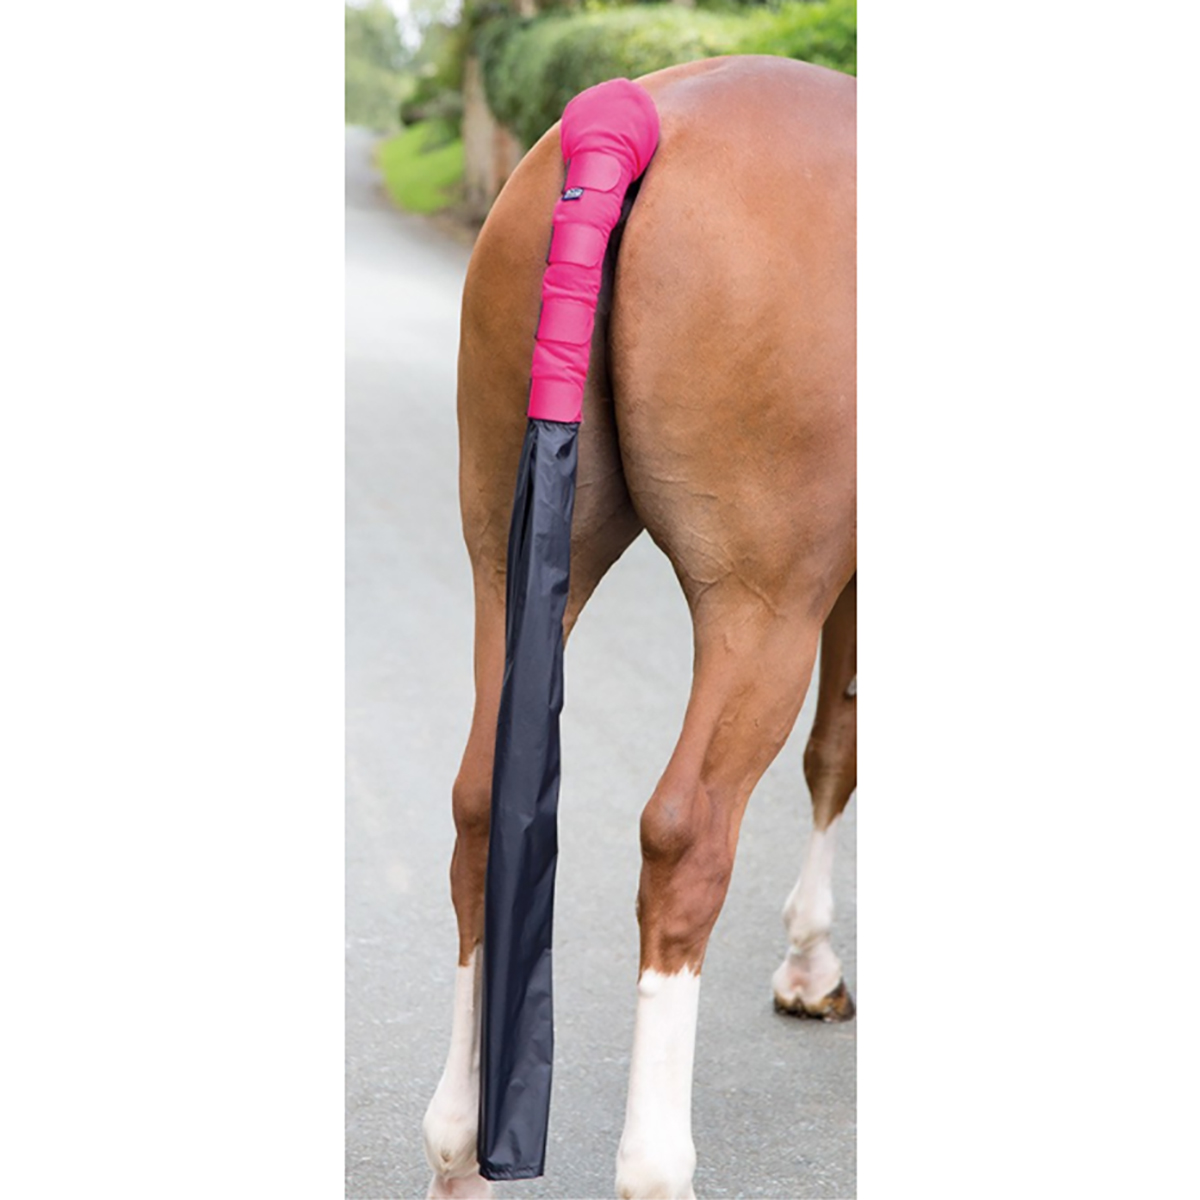 Shires Arma Padded Horse Tail Guard With Bag in Purple one size 